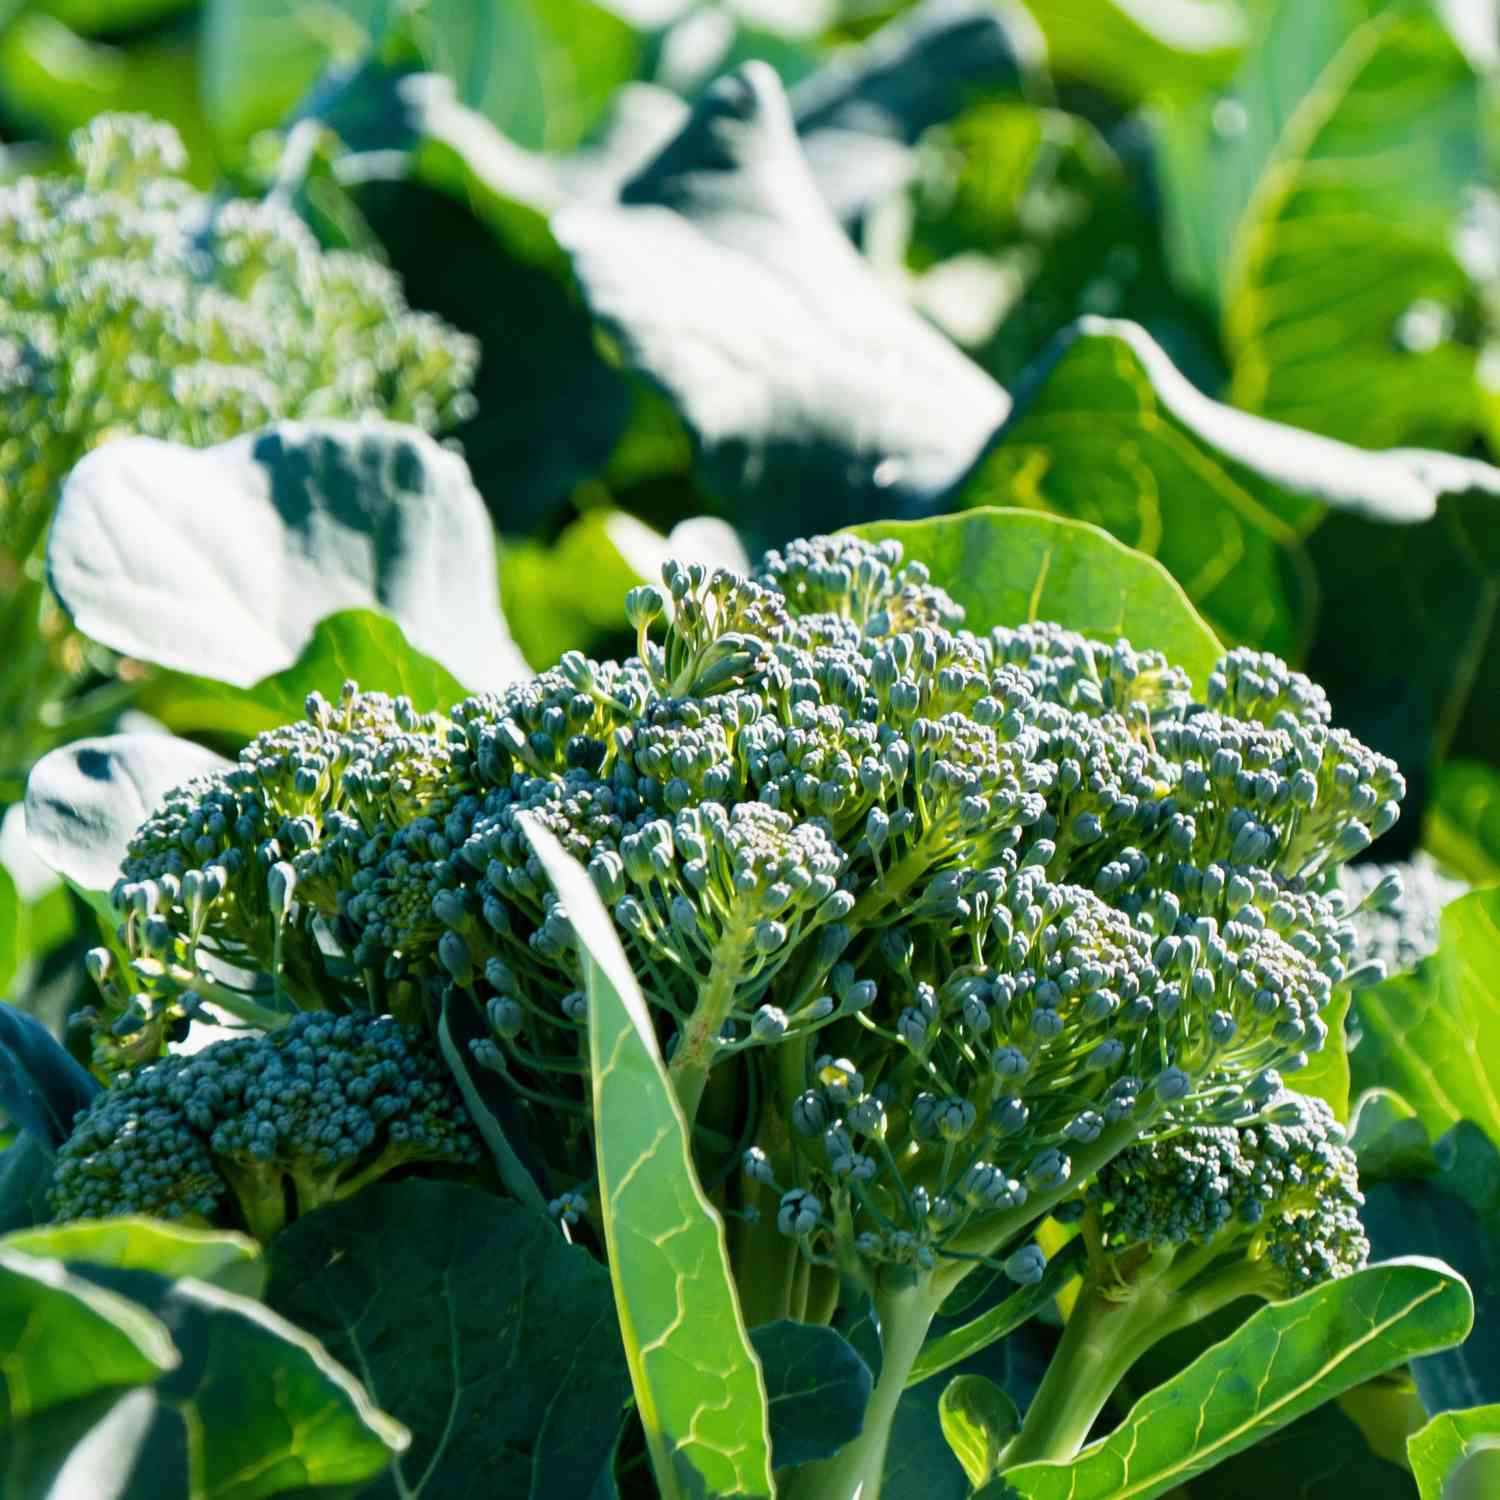 Close_Up_Of_Broccoli_Leaves_In_Farm